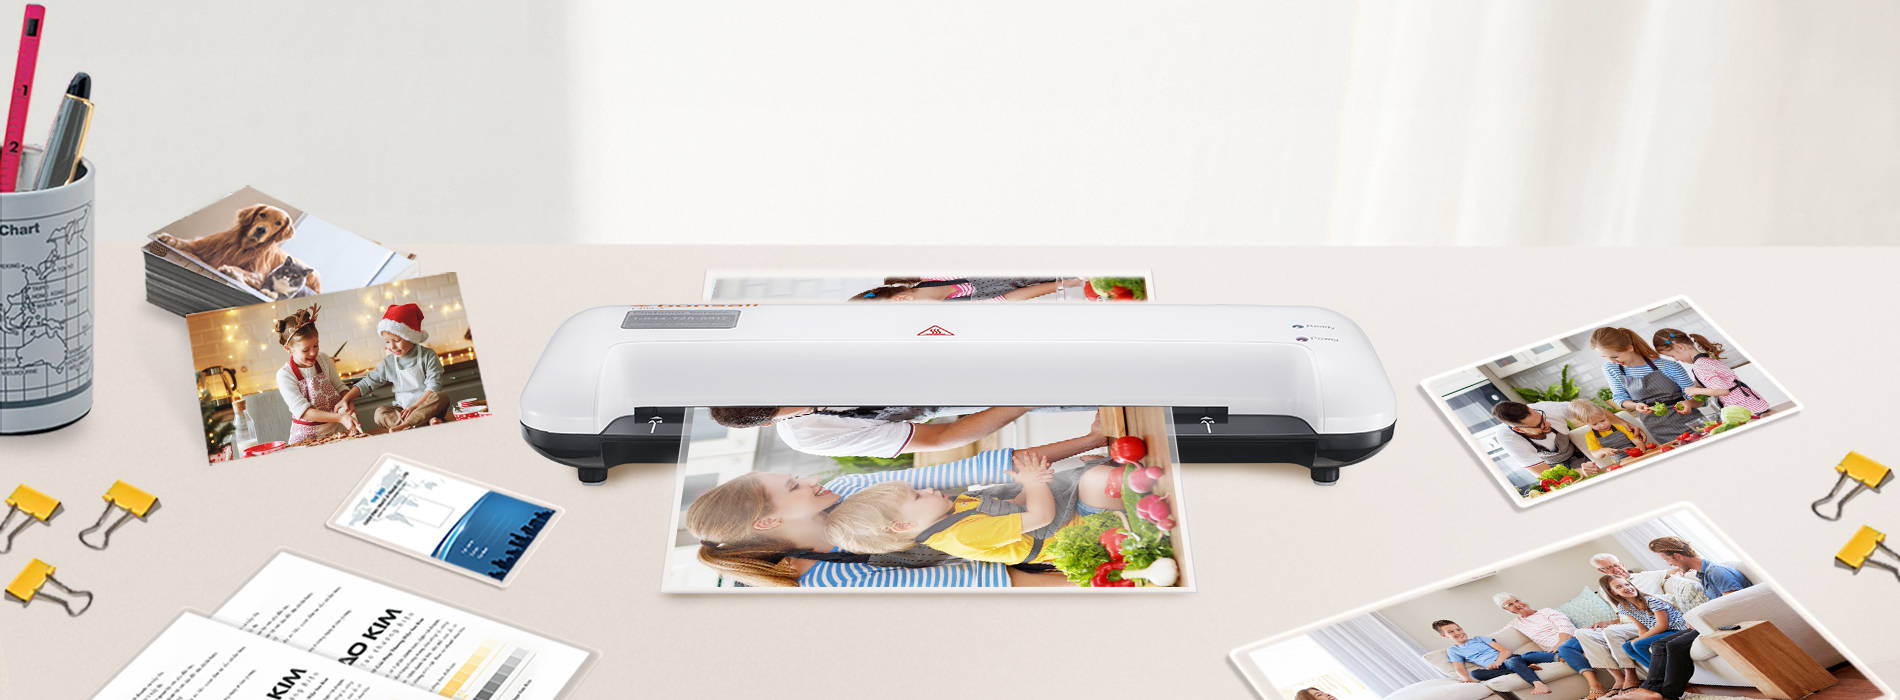 Bonsaii 4 in 1 Thermal Laminating solution Convenient for Home, Office and School Use